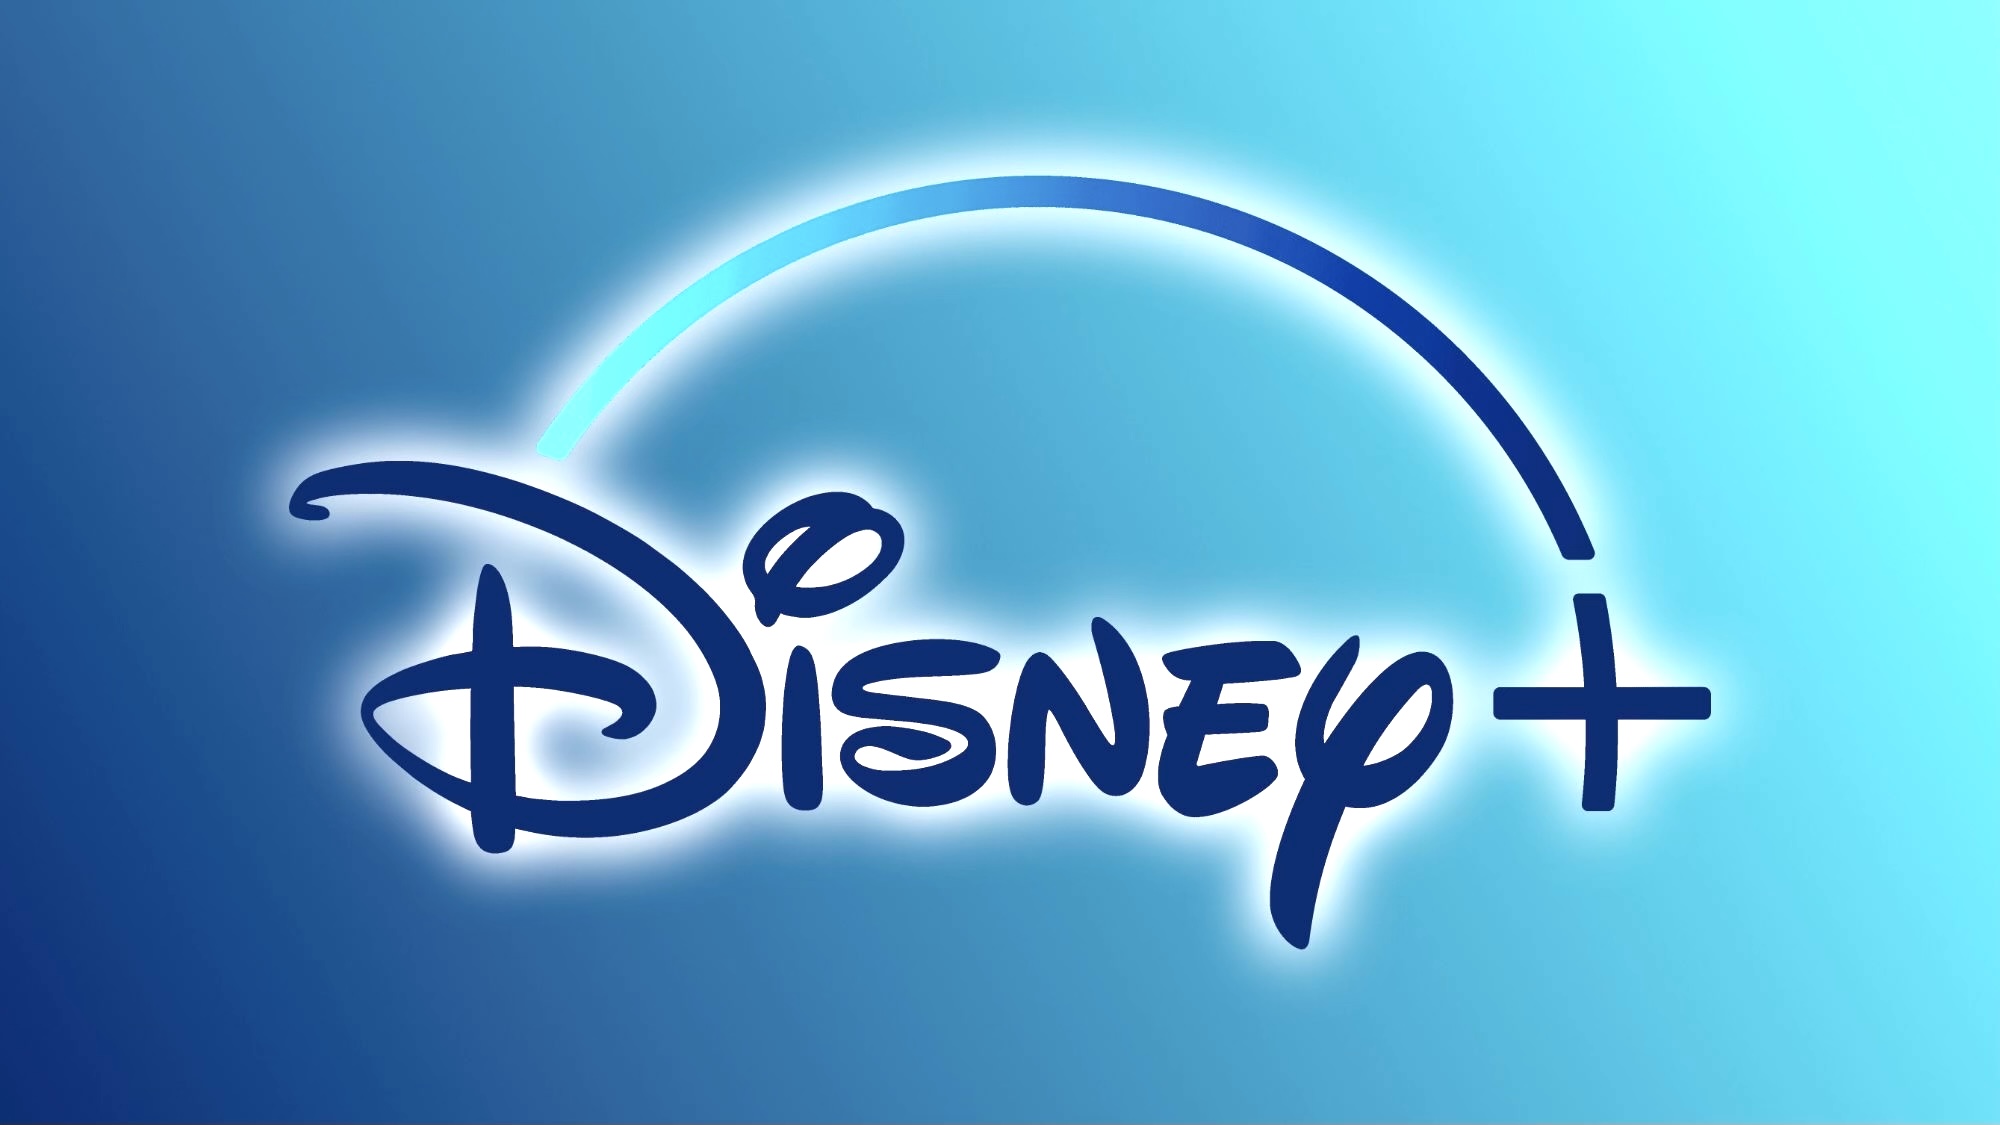 Do you want Disney+ for just 2 euros a month? You better hurry